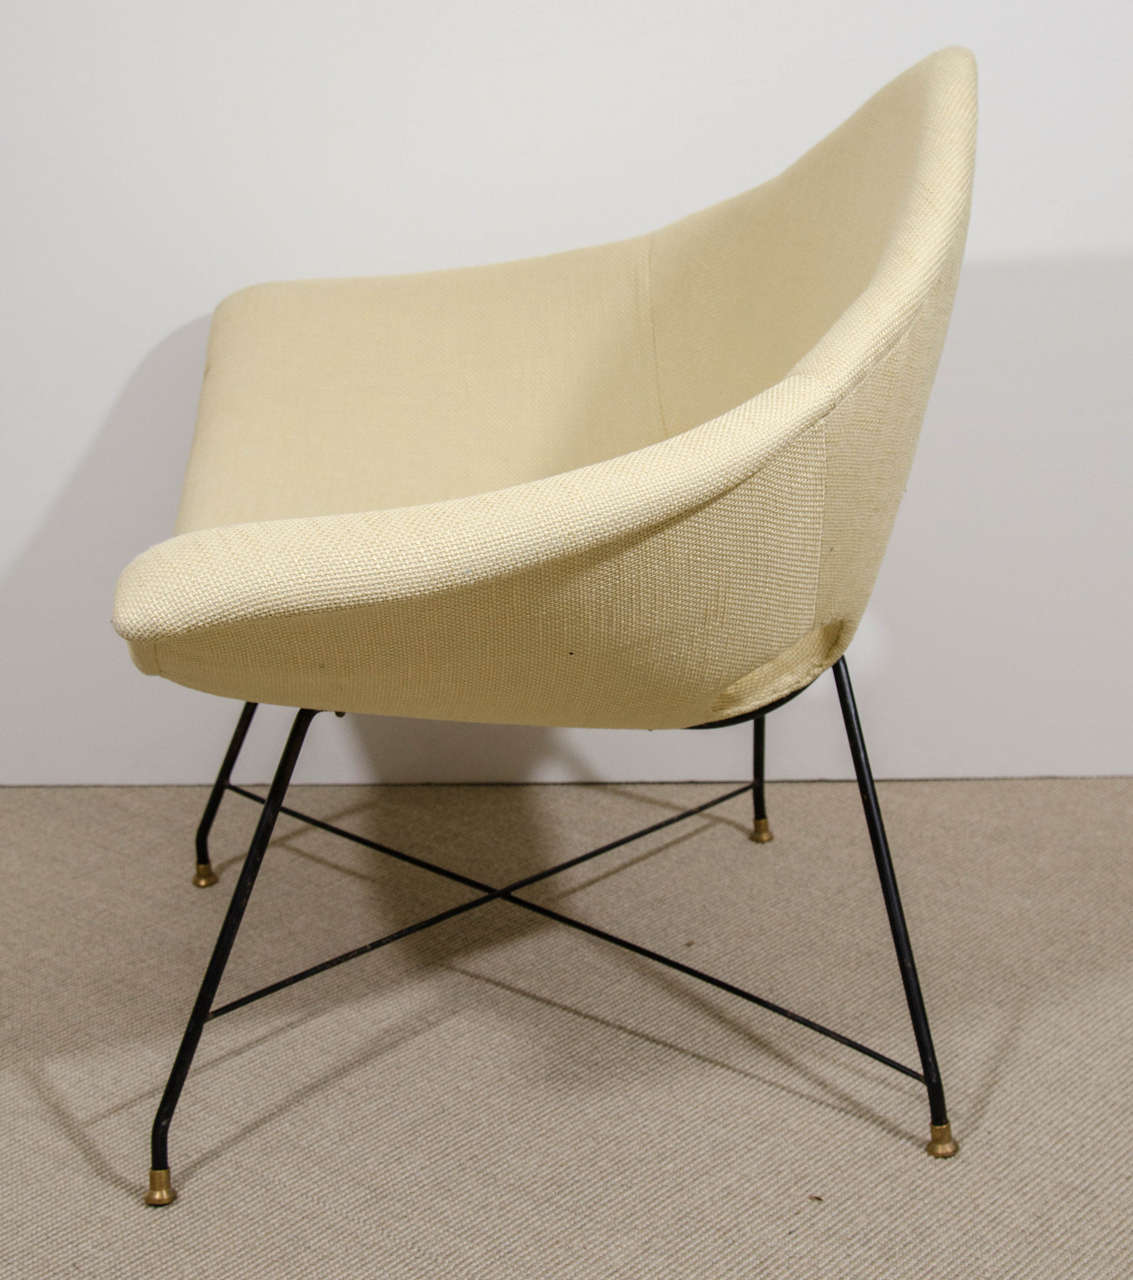 Pair of Off-White Fratelli Saporiti, Augusto Bozzi Chairs, Italy, circa 1958 In Excellent Condition For Sale In New York, NY